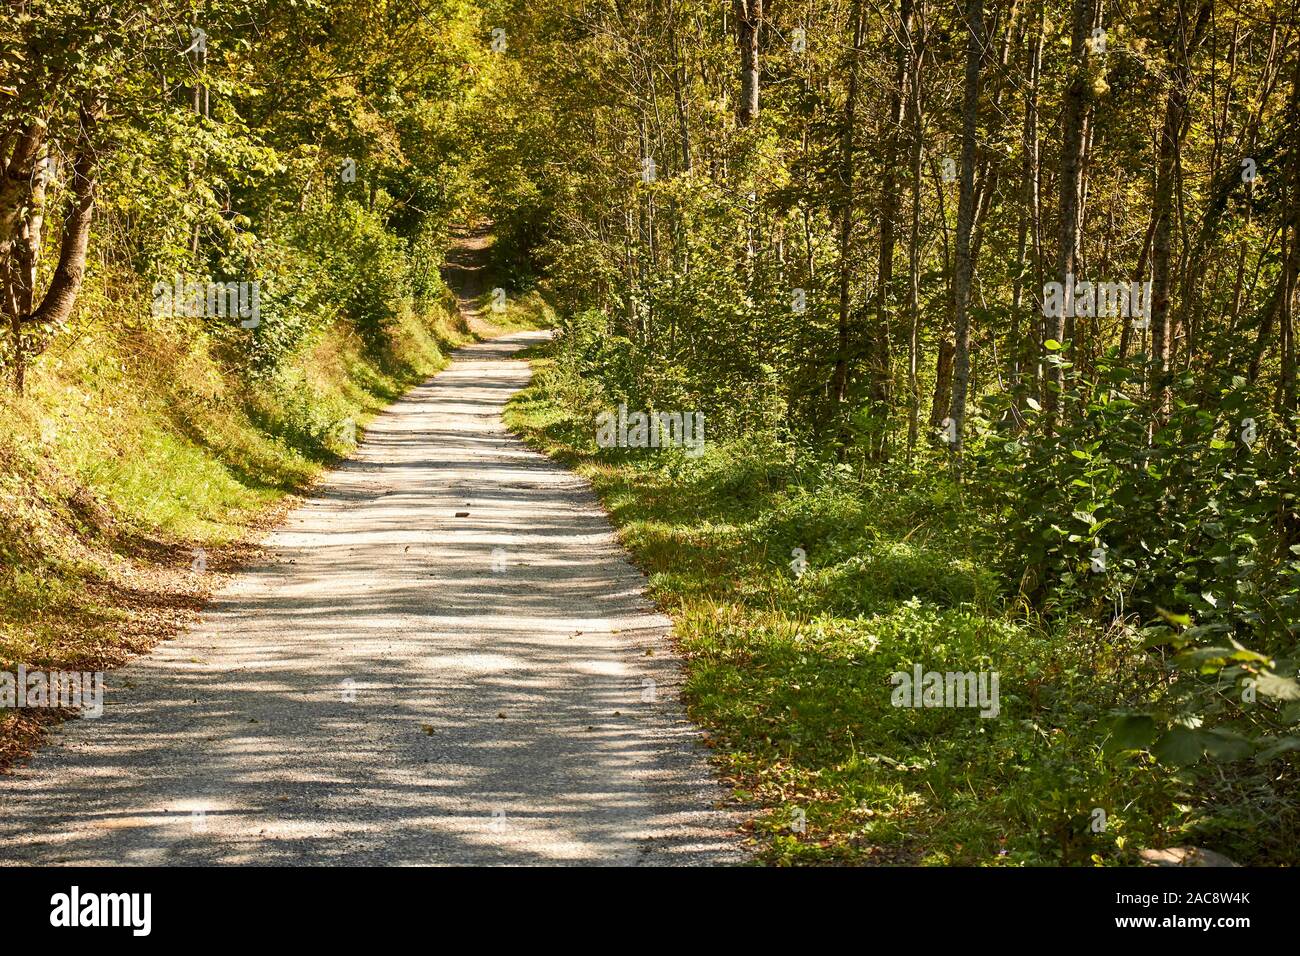 A country road near Entracque, Cuneo, Piedmont, Italy Stock Photo